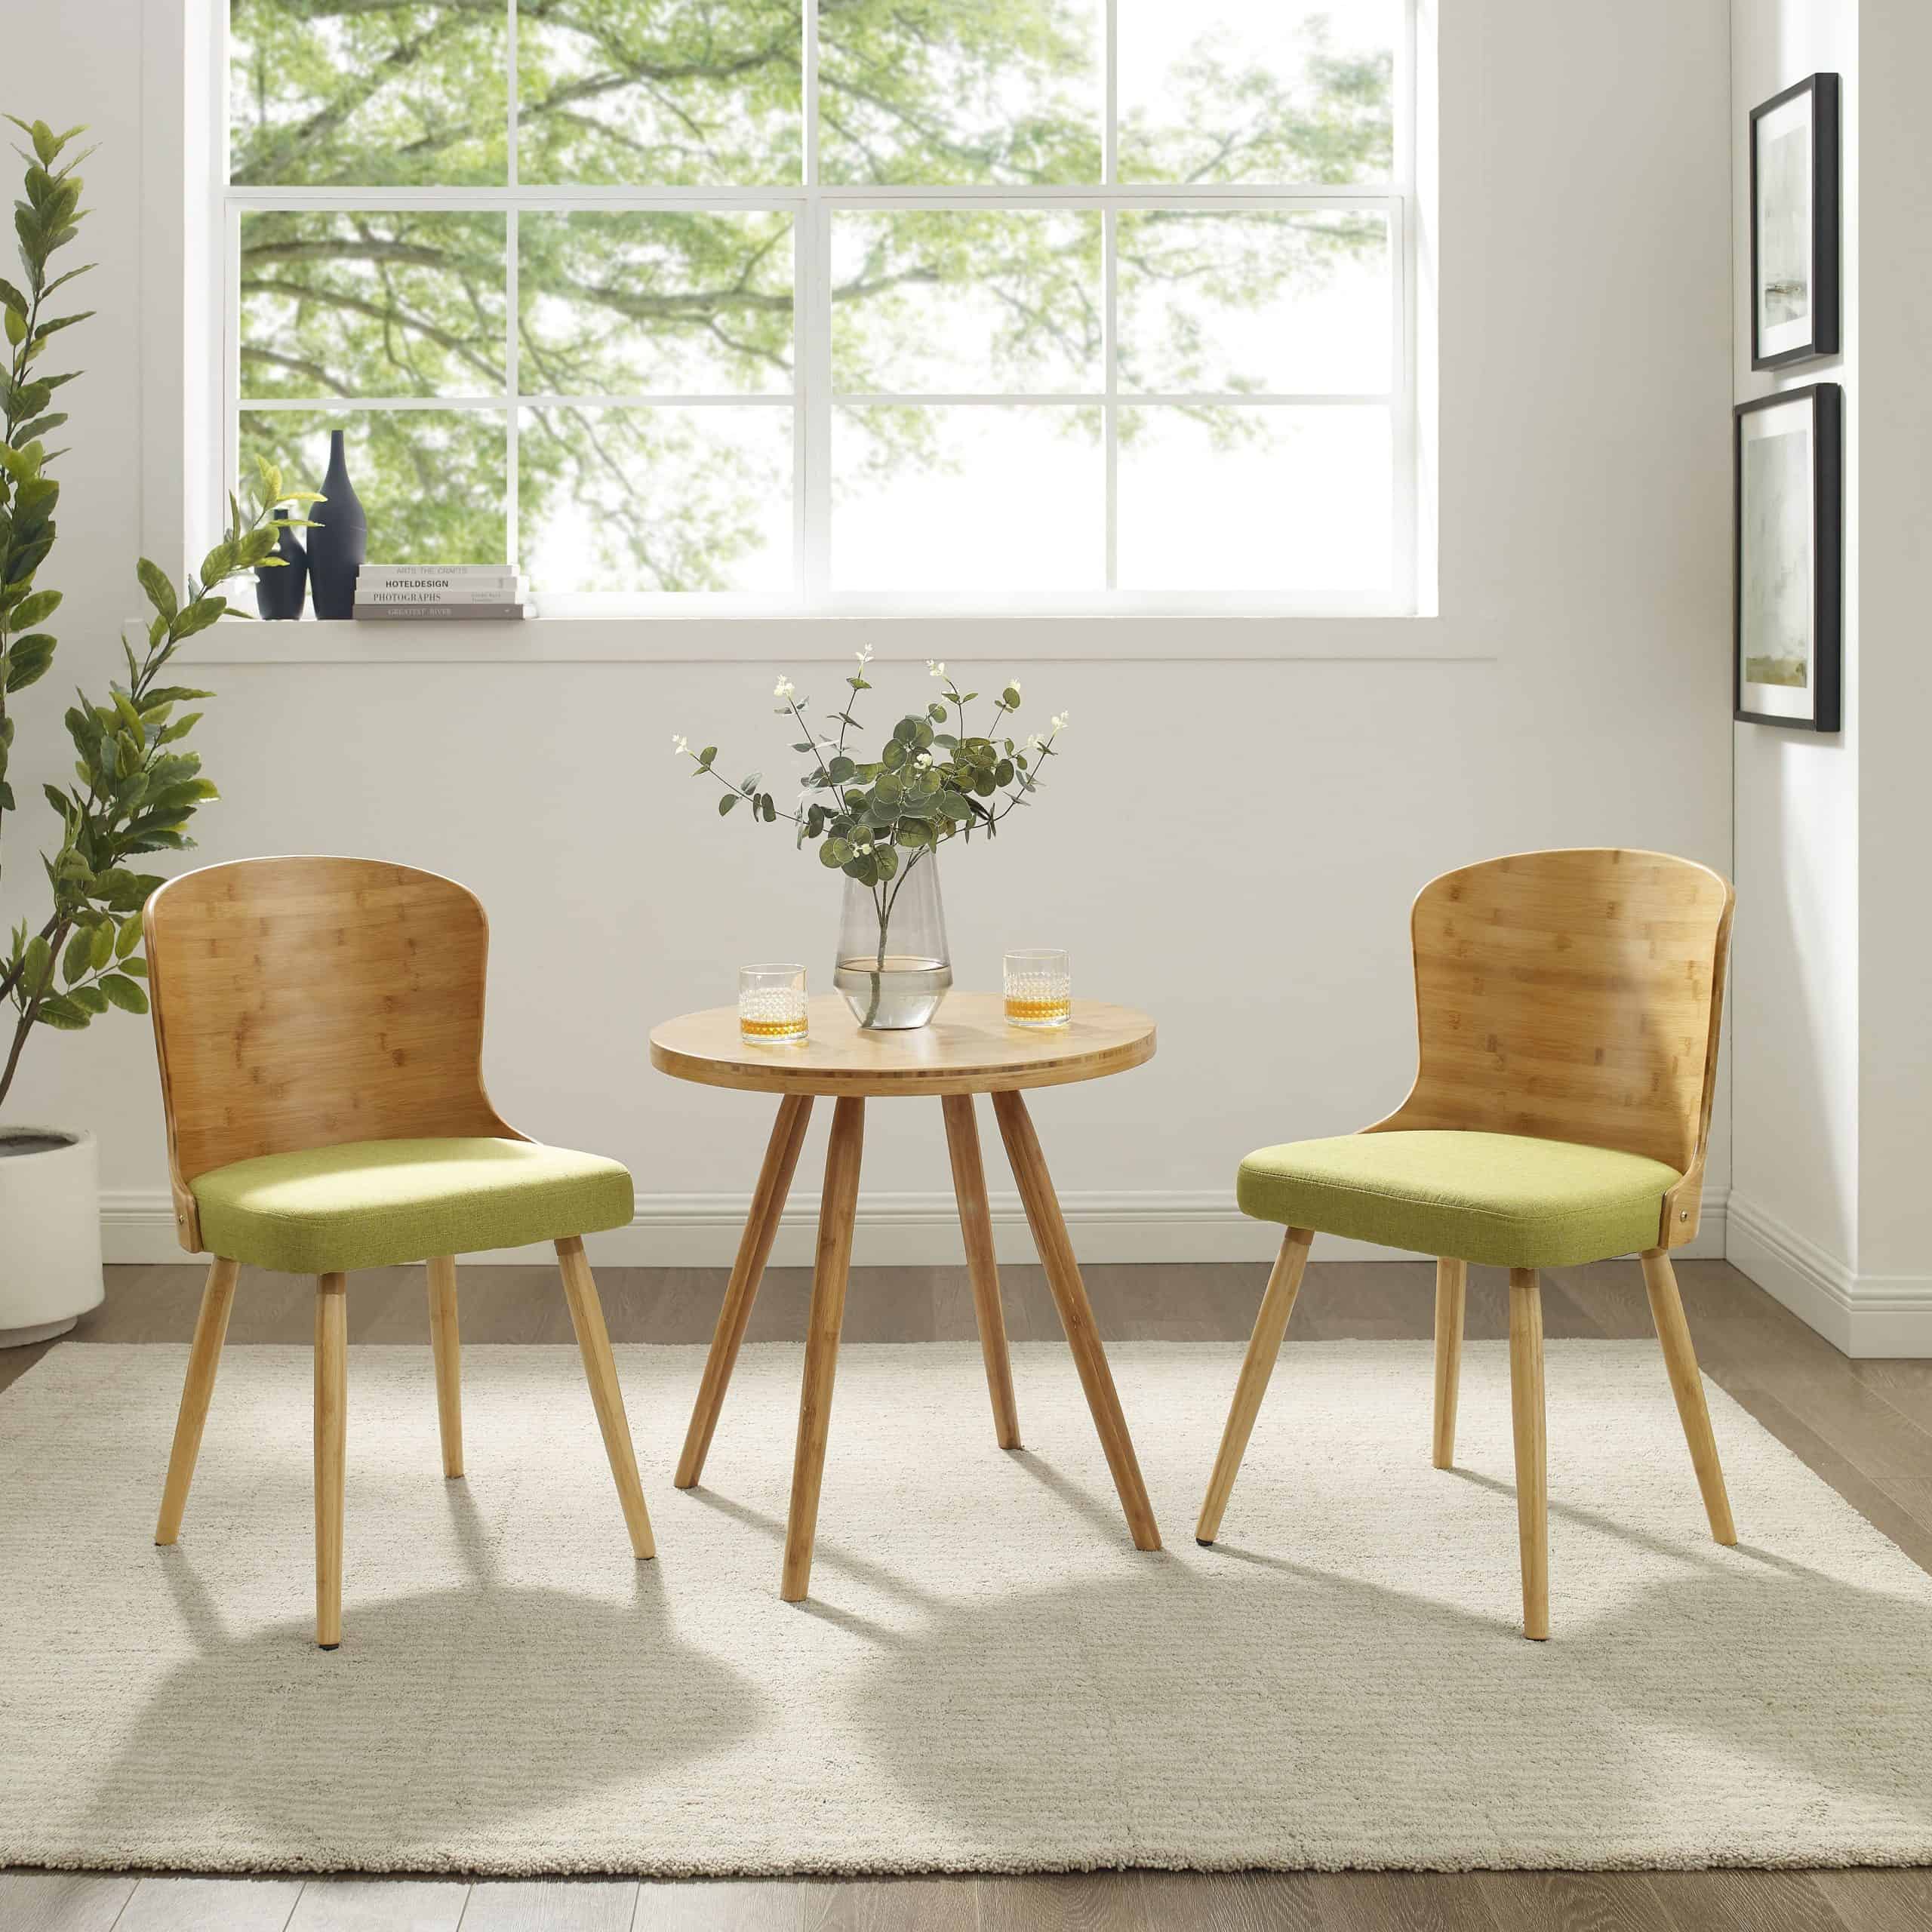 Revitalize Your Dining Space With These Bamboo Chairs